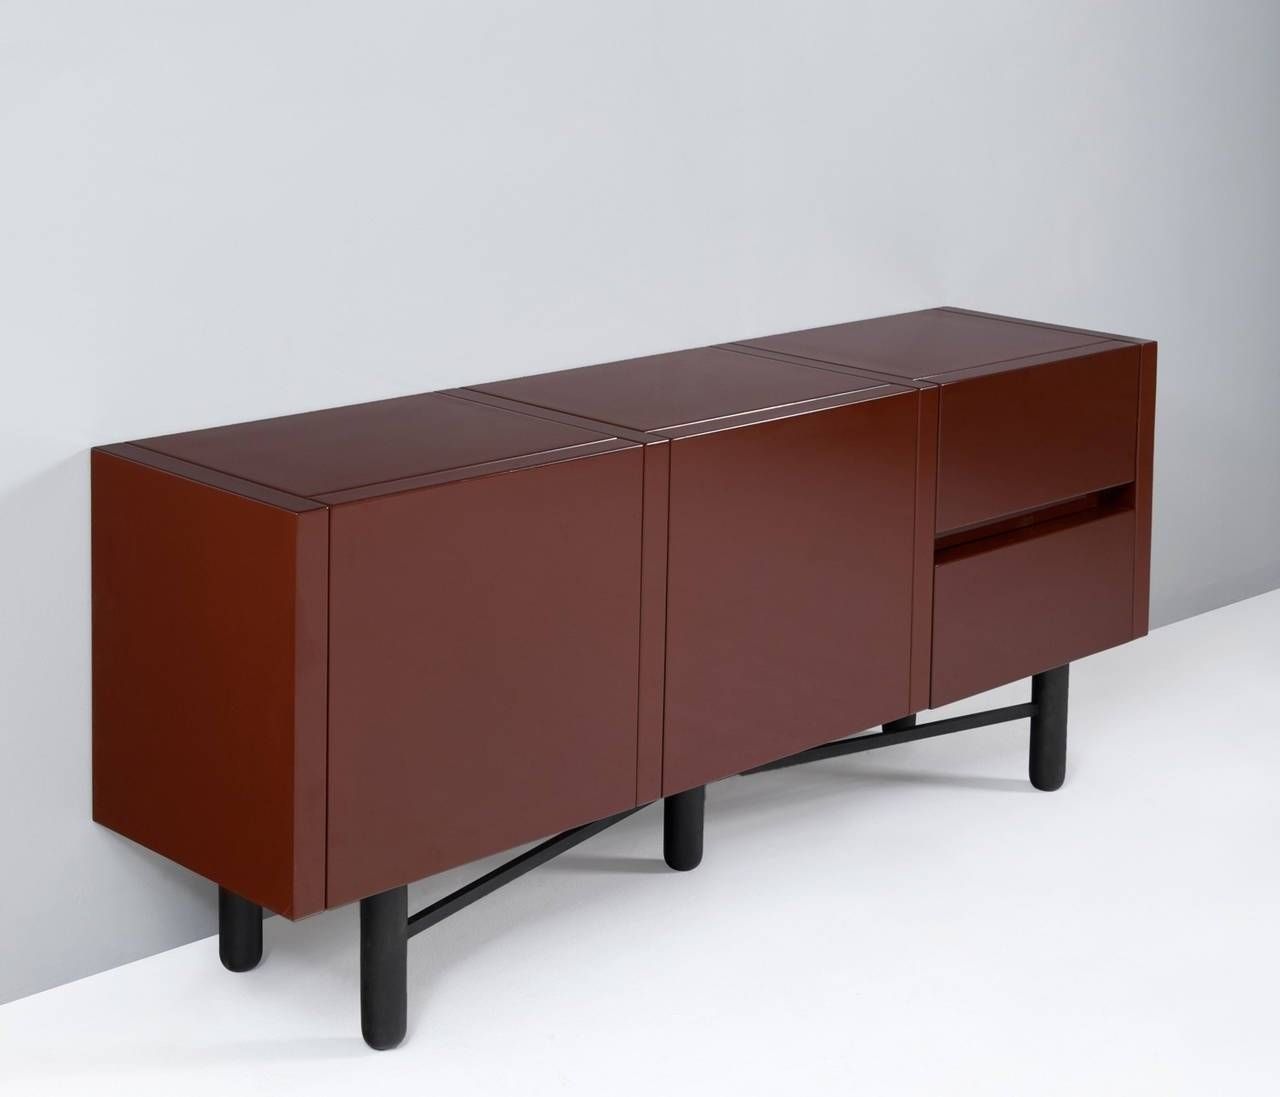 Roche Bobois Red Lacquered High Gloss Sideboard For Sale At 1stdibs Pertaining To Black High Gloss Sideboard (Photo 1 of 20)